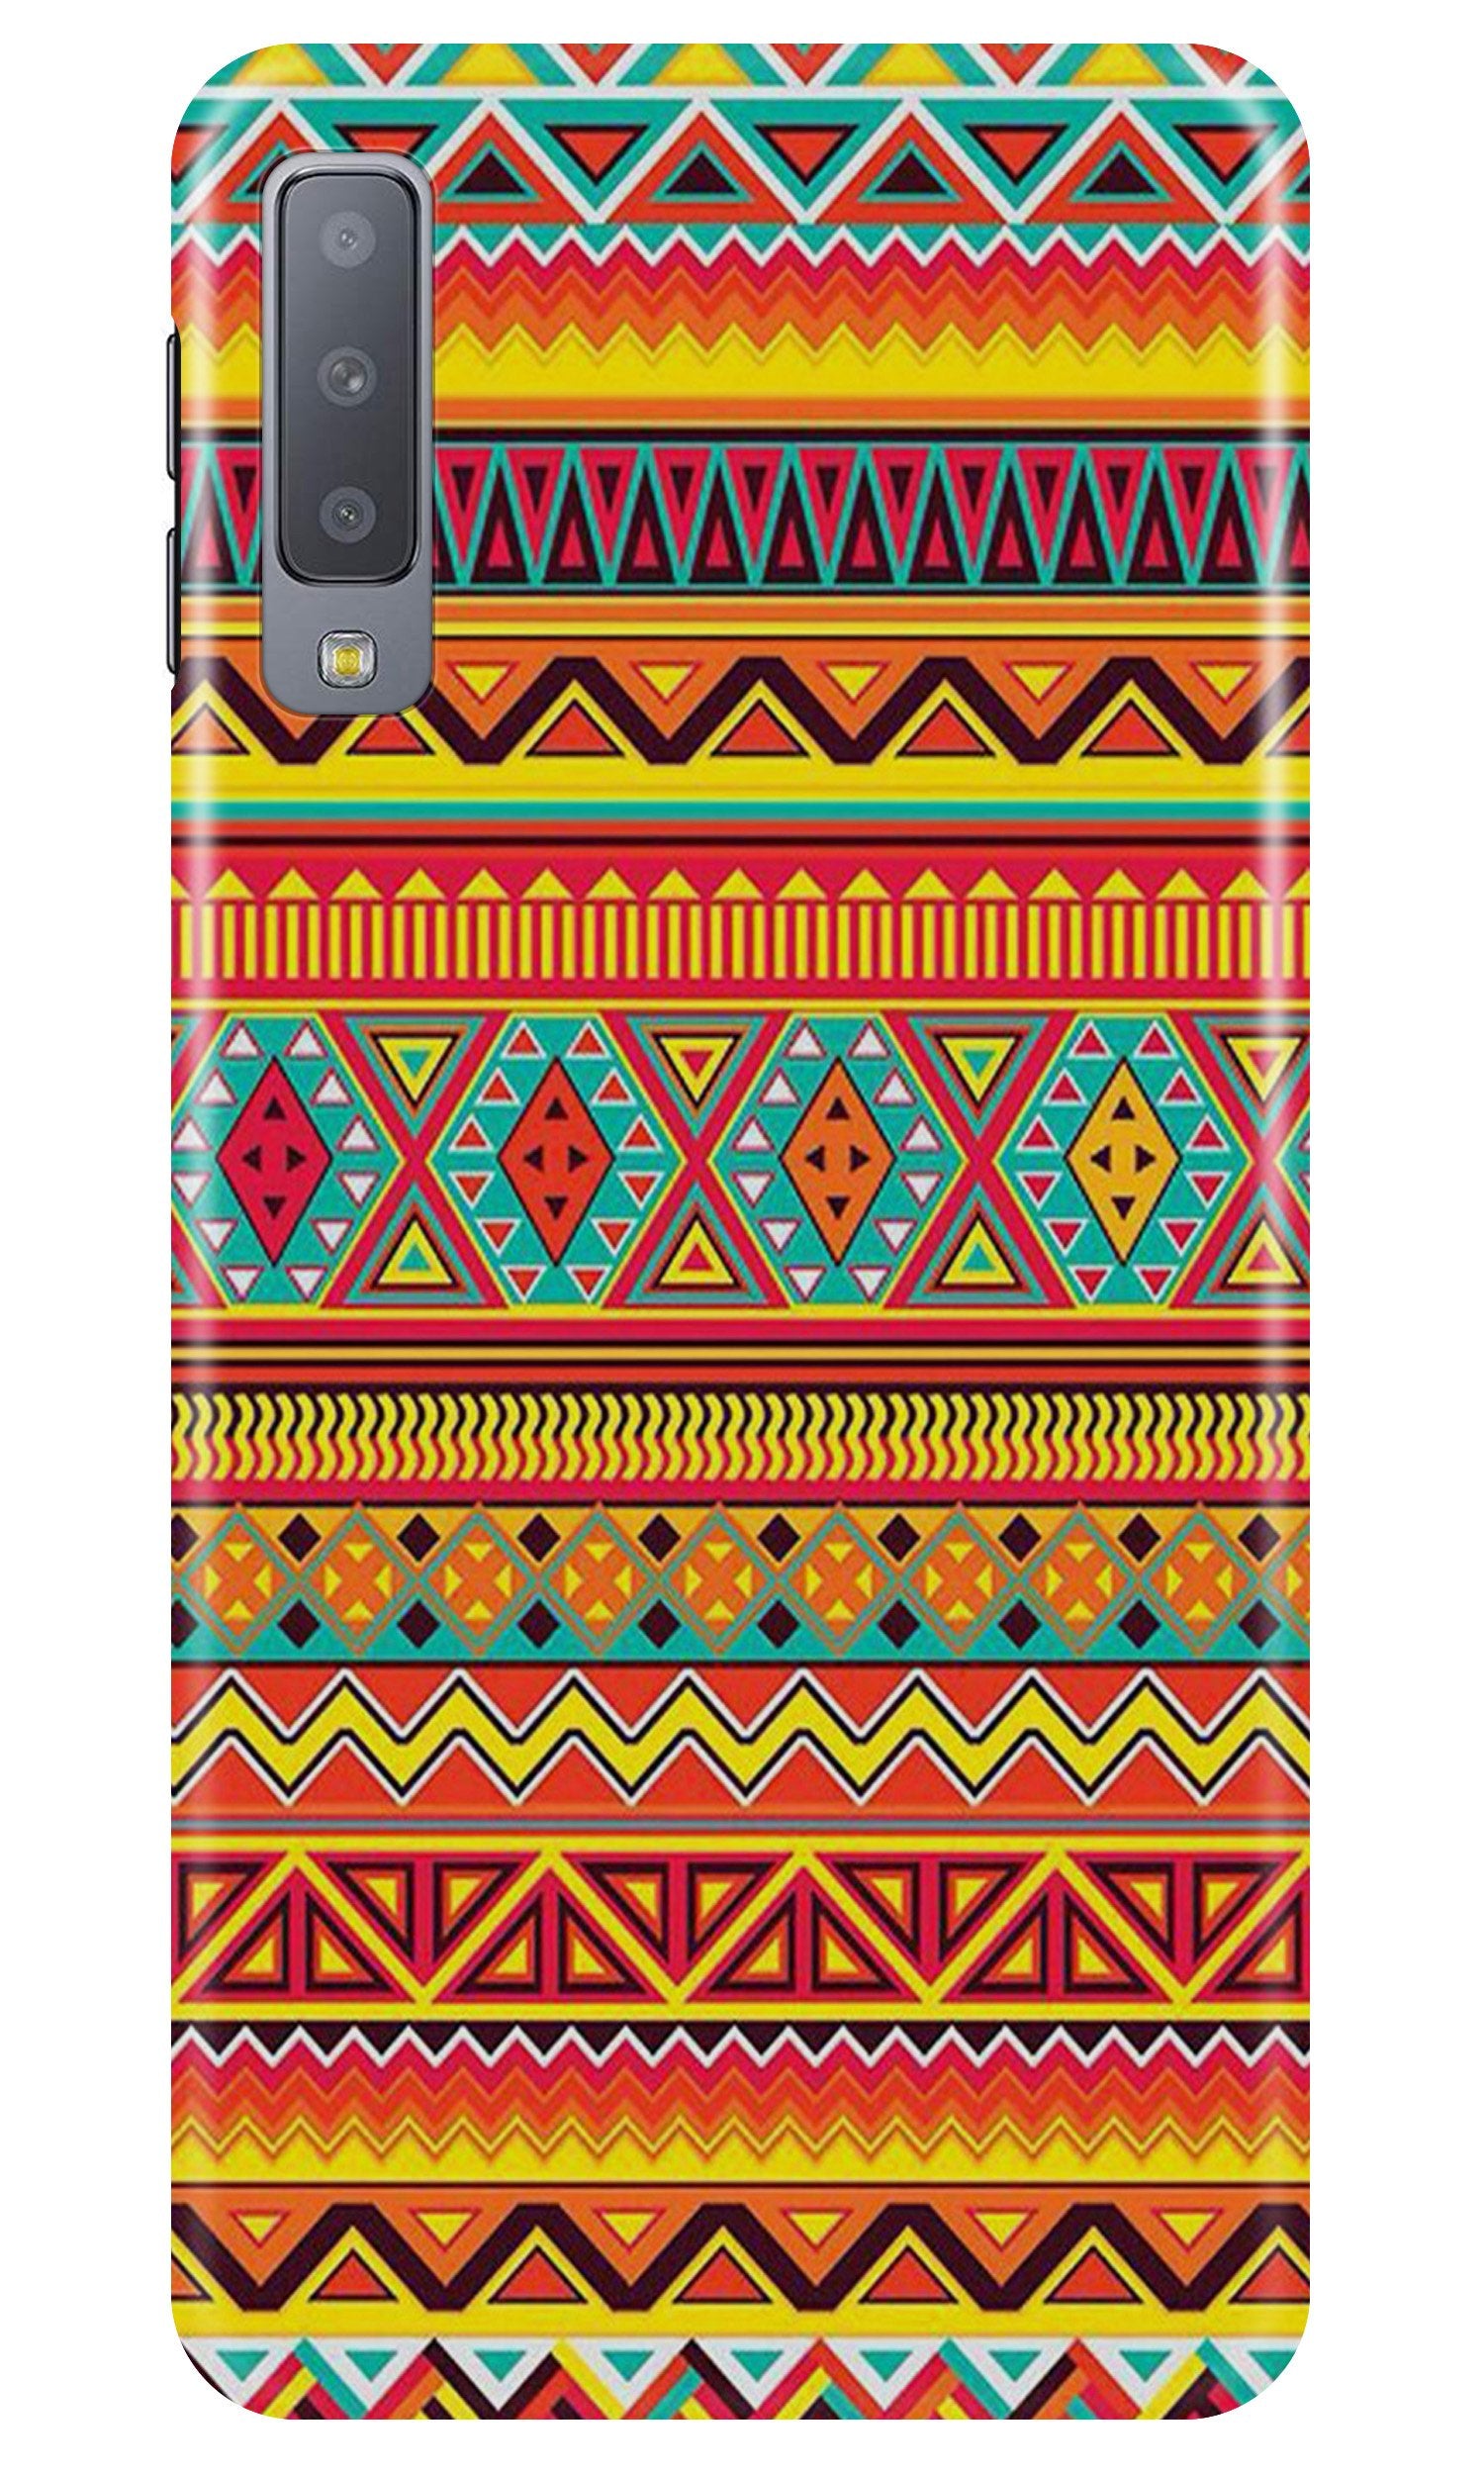 Zigzag line pattern Case for Samung Galaxy A70s